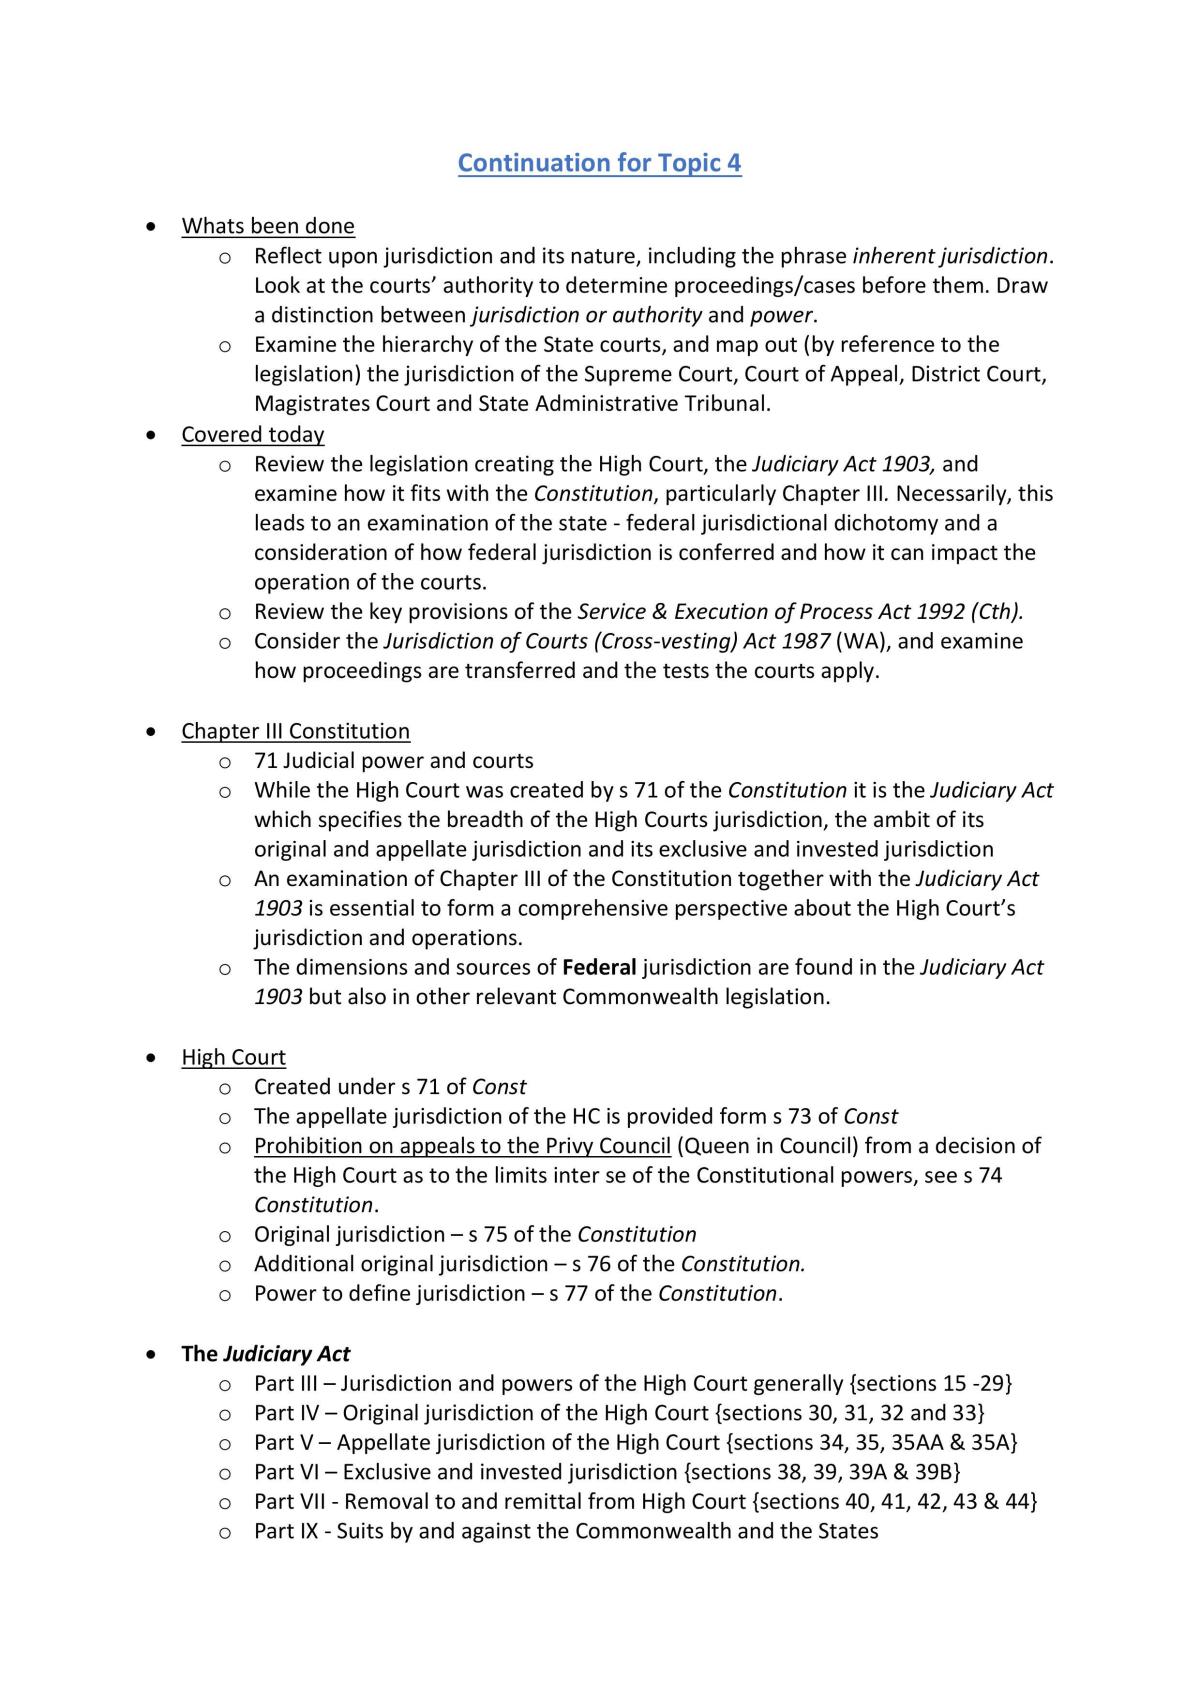 Study Notes - Entire Unit - Page 24